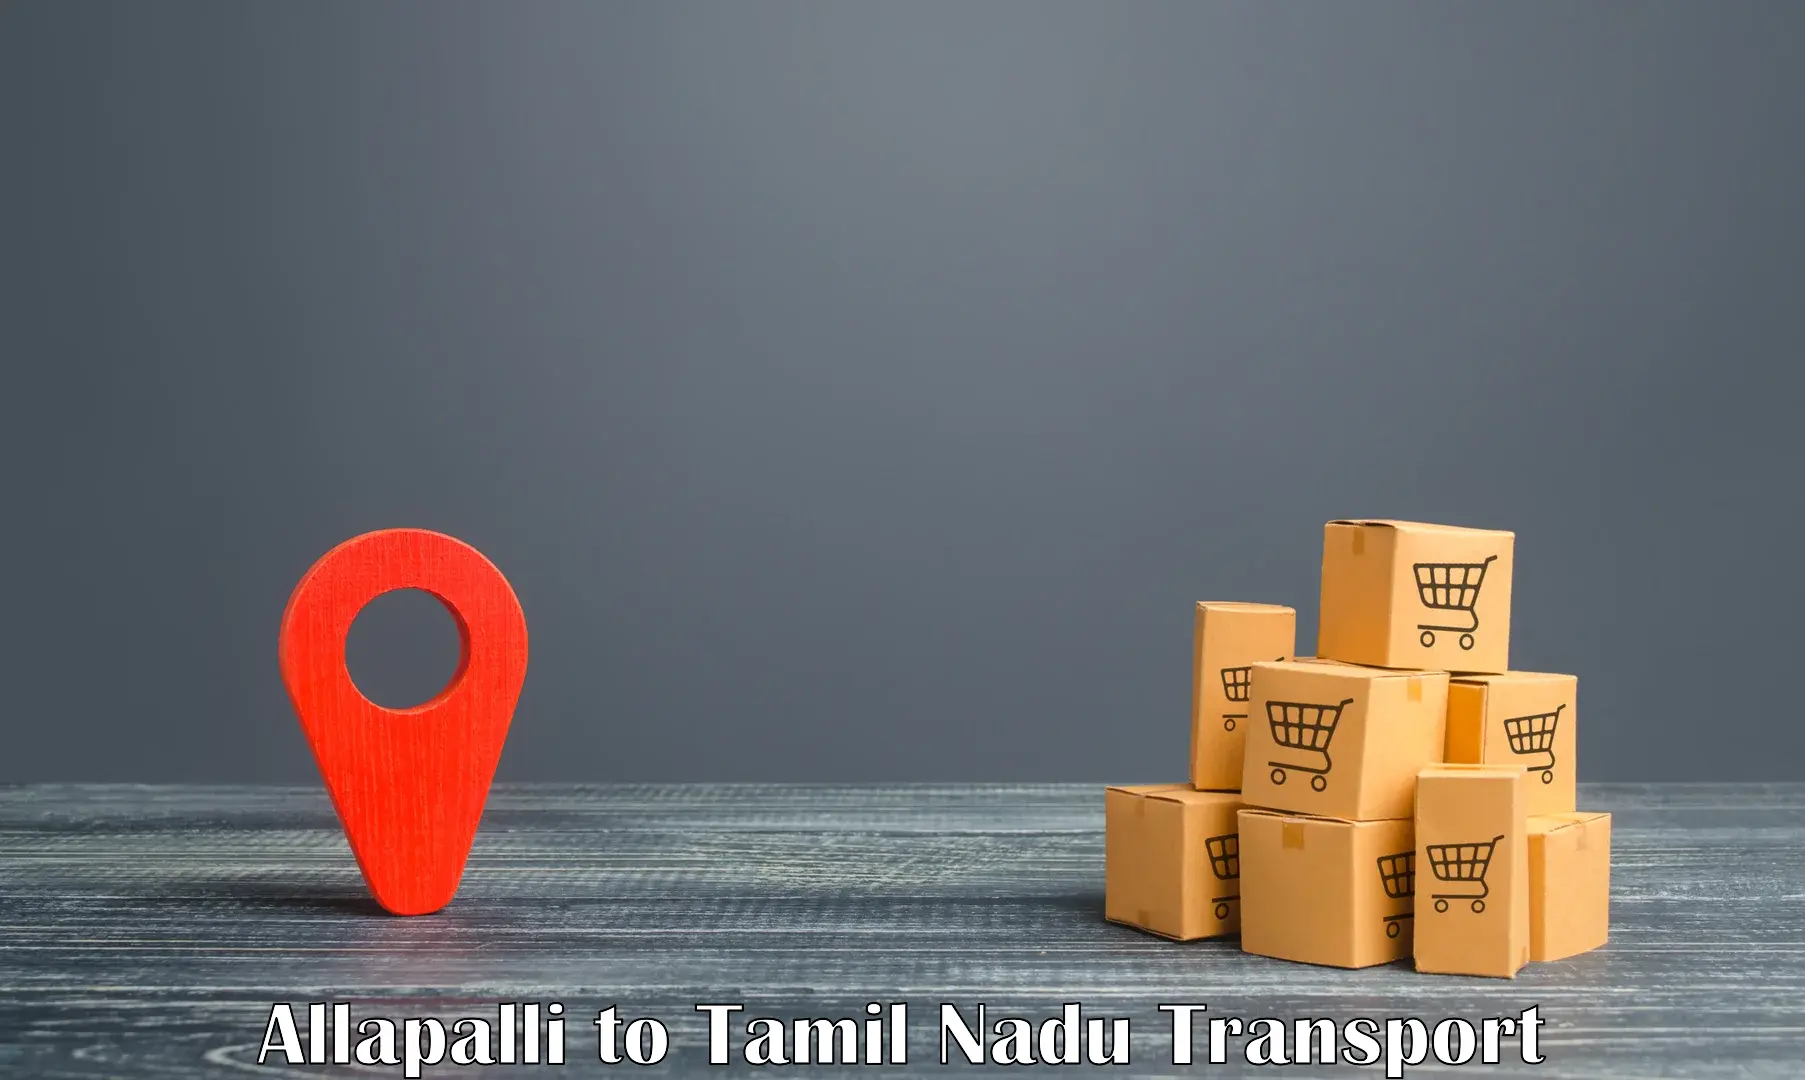 Express transport services Allapalli to Ennore Port Chennai